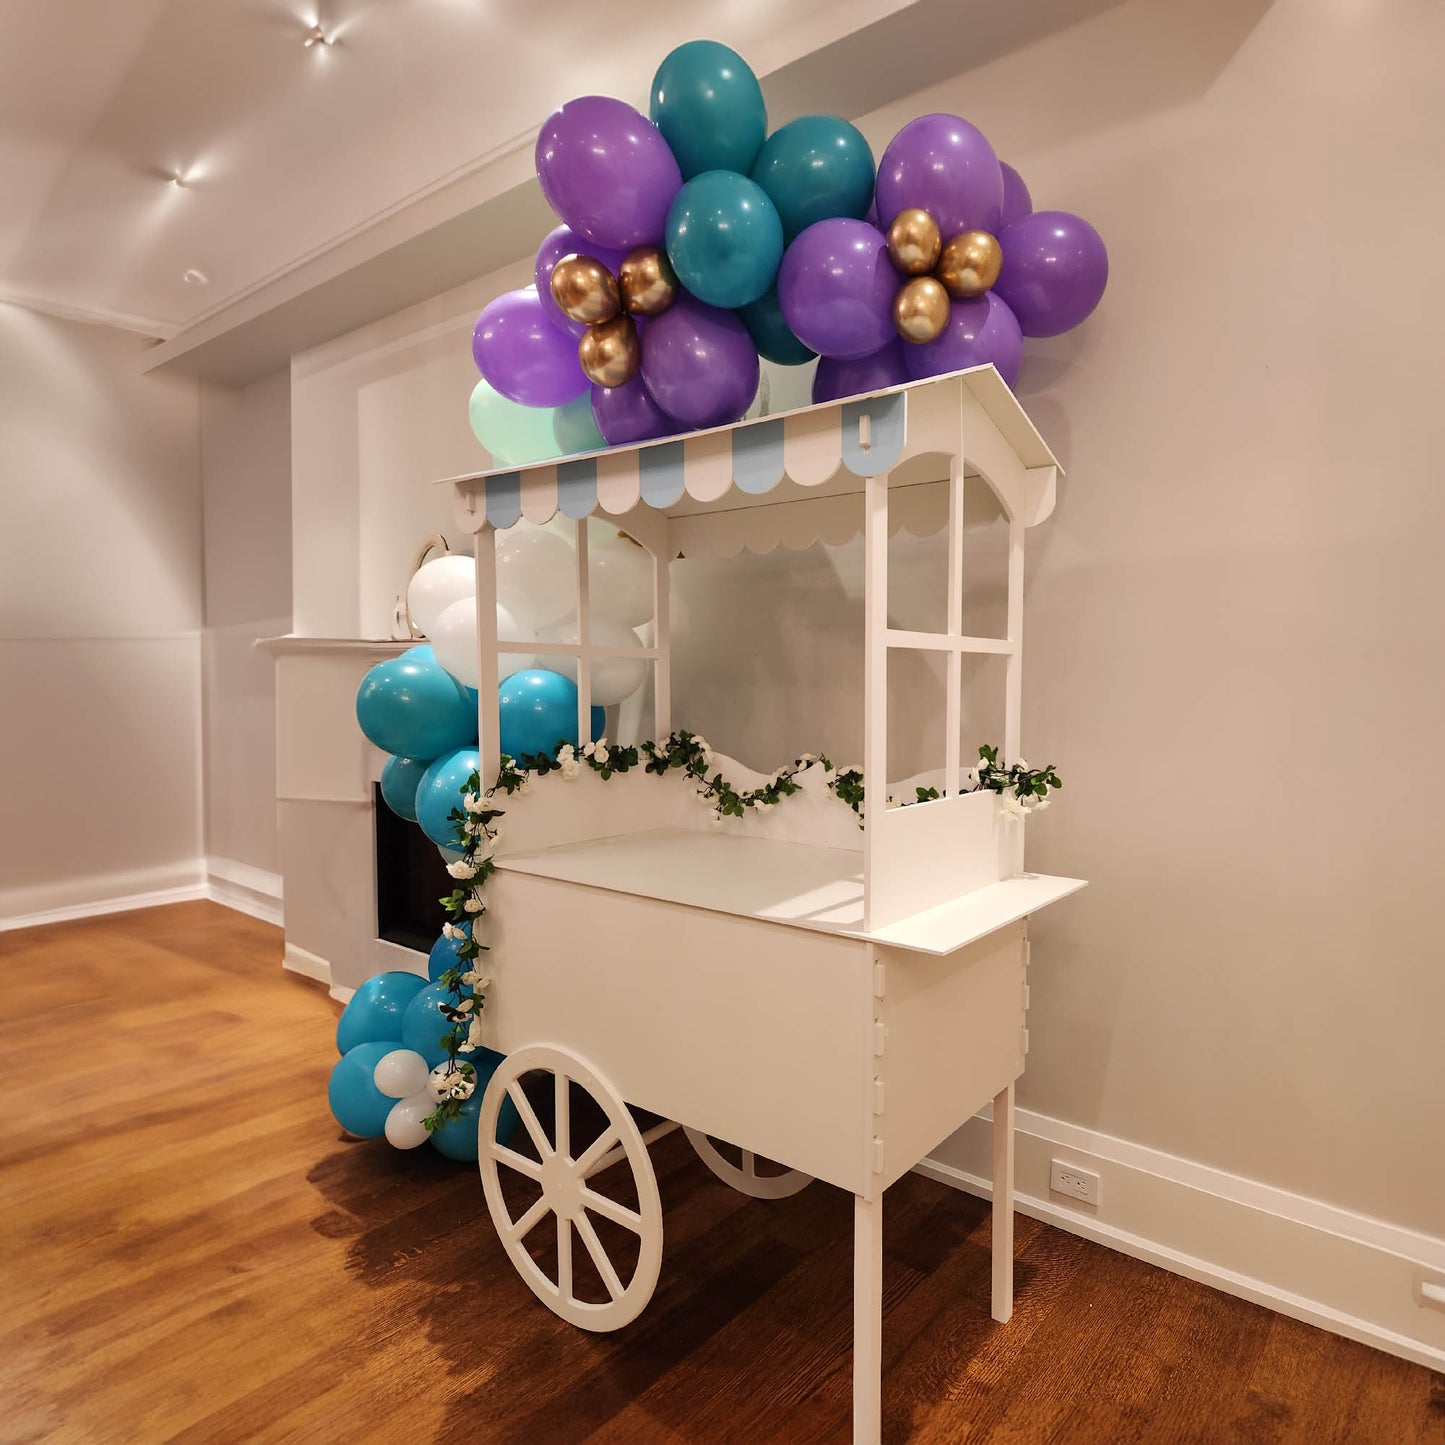 Party Decoration Cart, candy cart for sale, vendor cart, Event Planning Candy Cart, Birthday Decorations, Collapsible Wedding Sweet Candy Cart, Candy Cart On Wheels for sale, Simple column Candy Cart